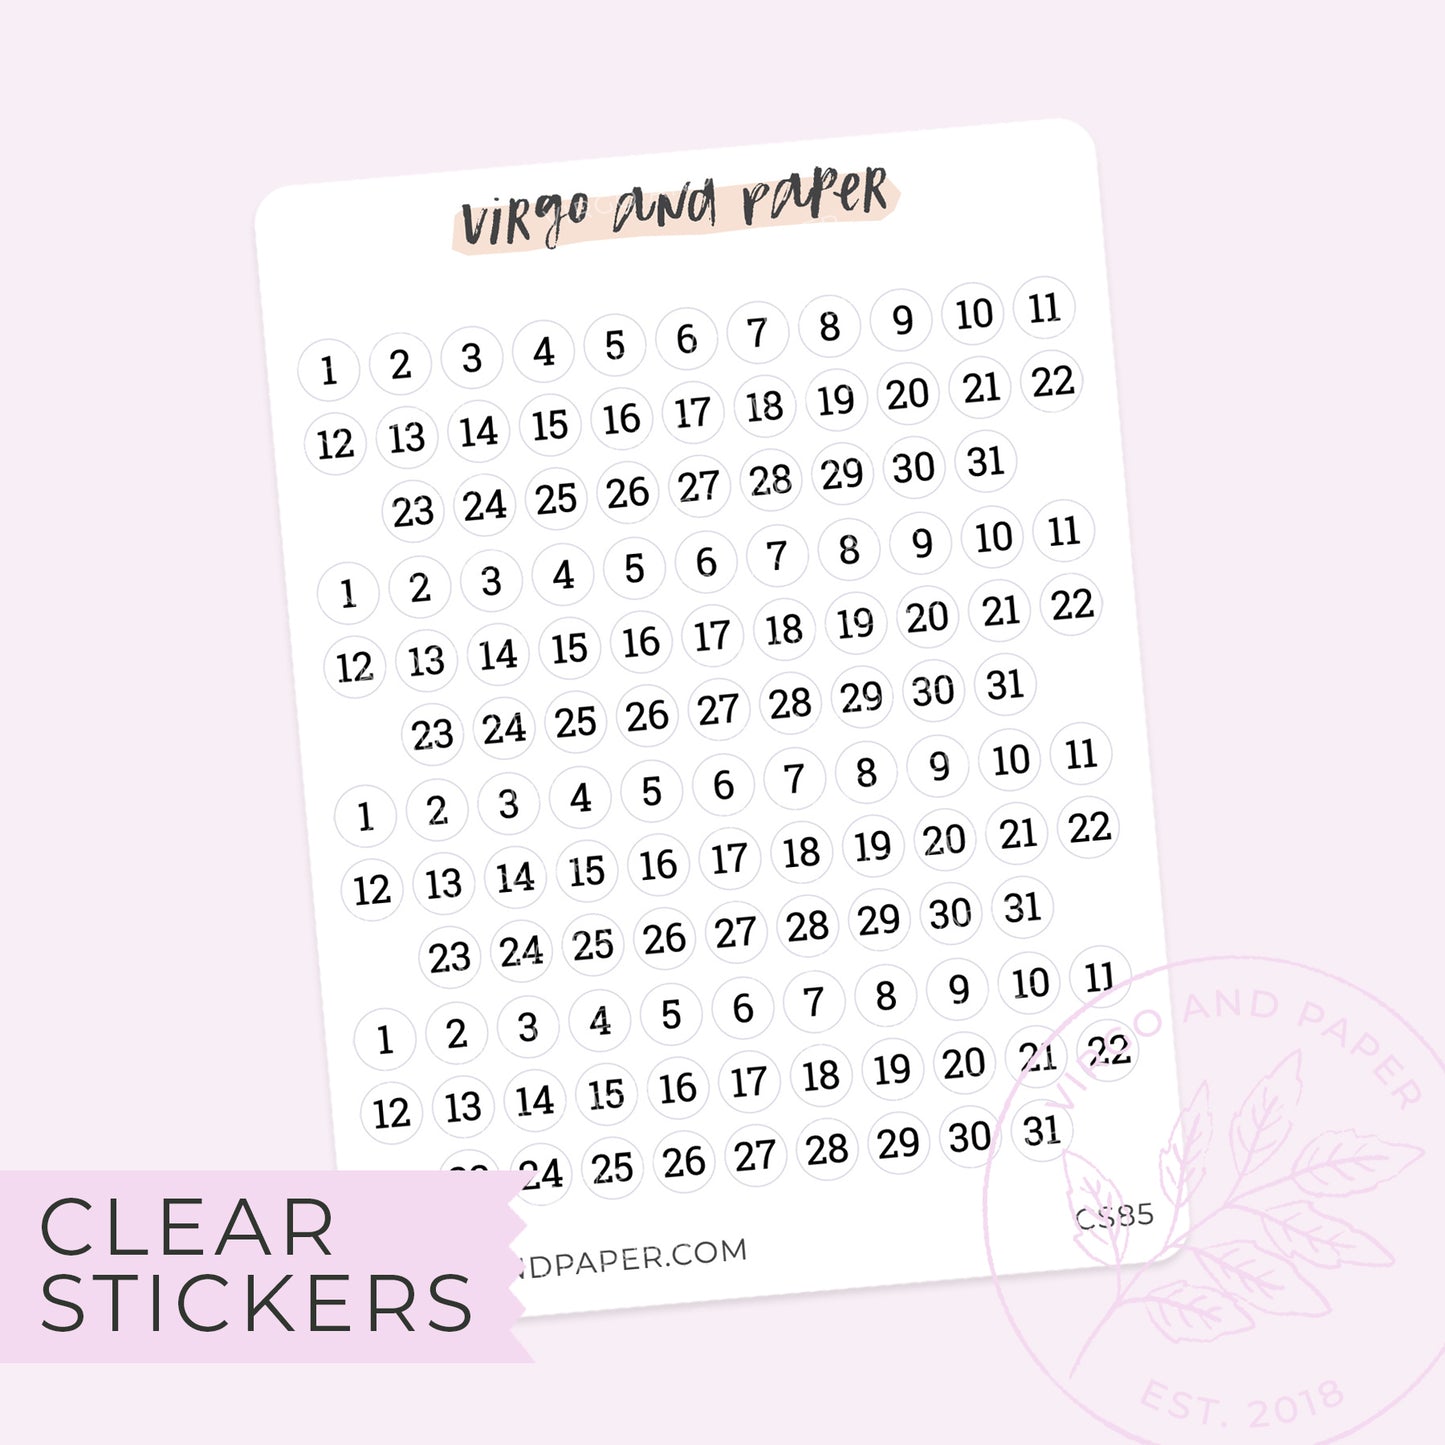 Clear Number Stickers – Virgo and Paper